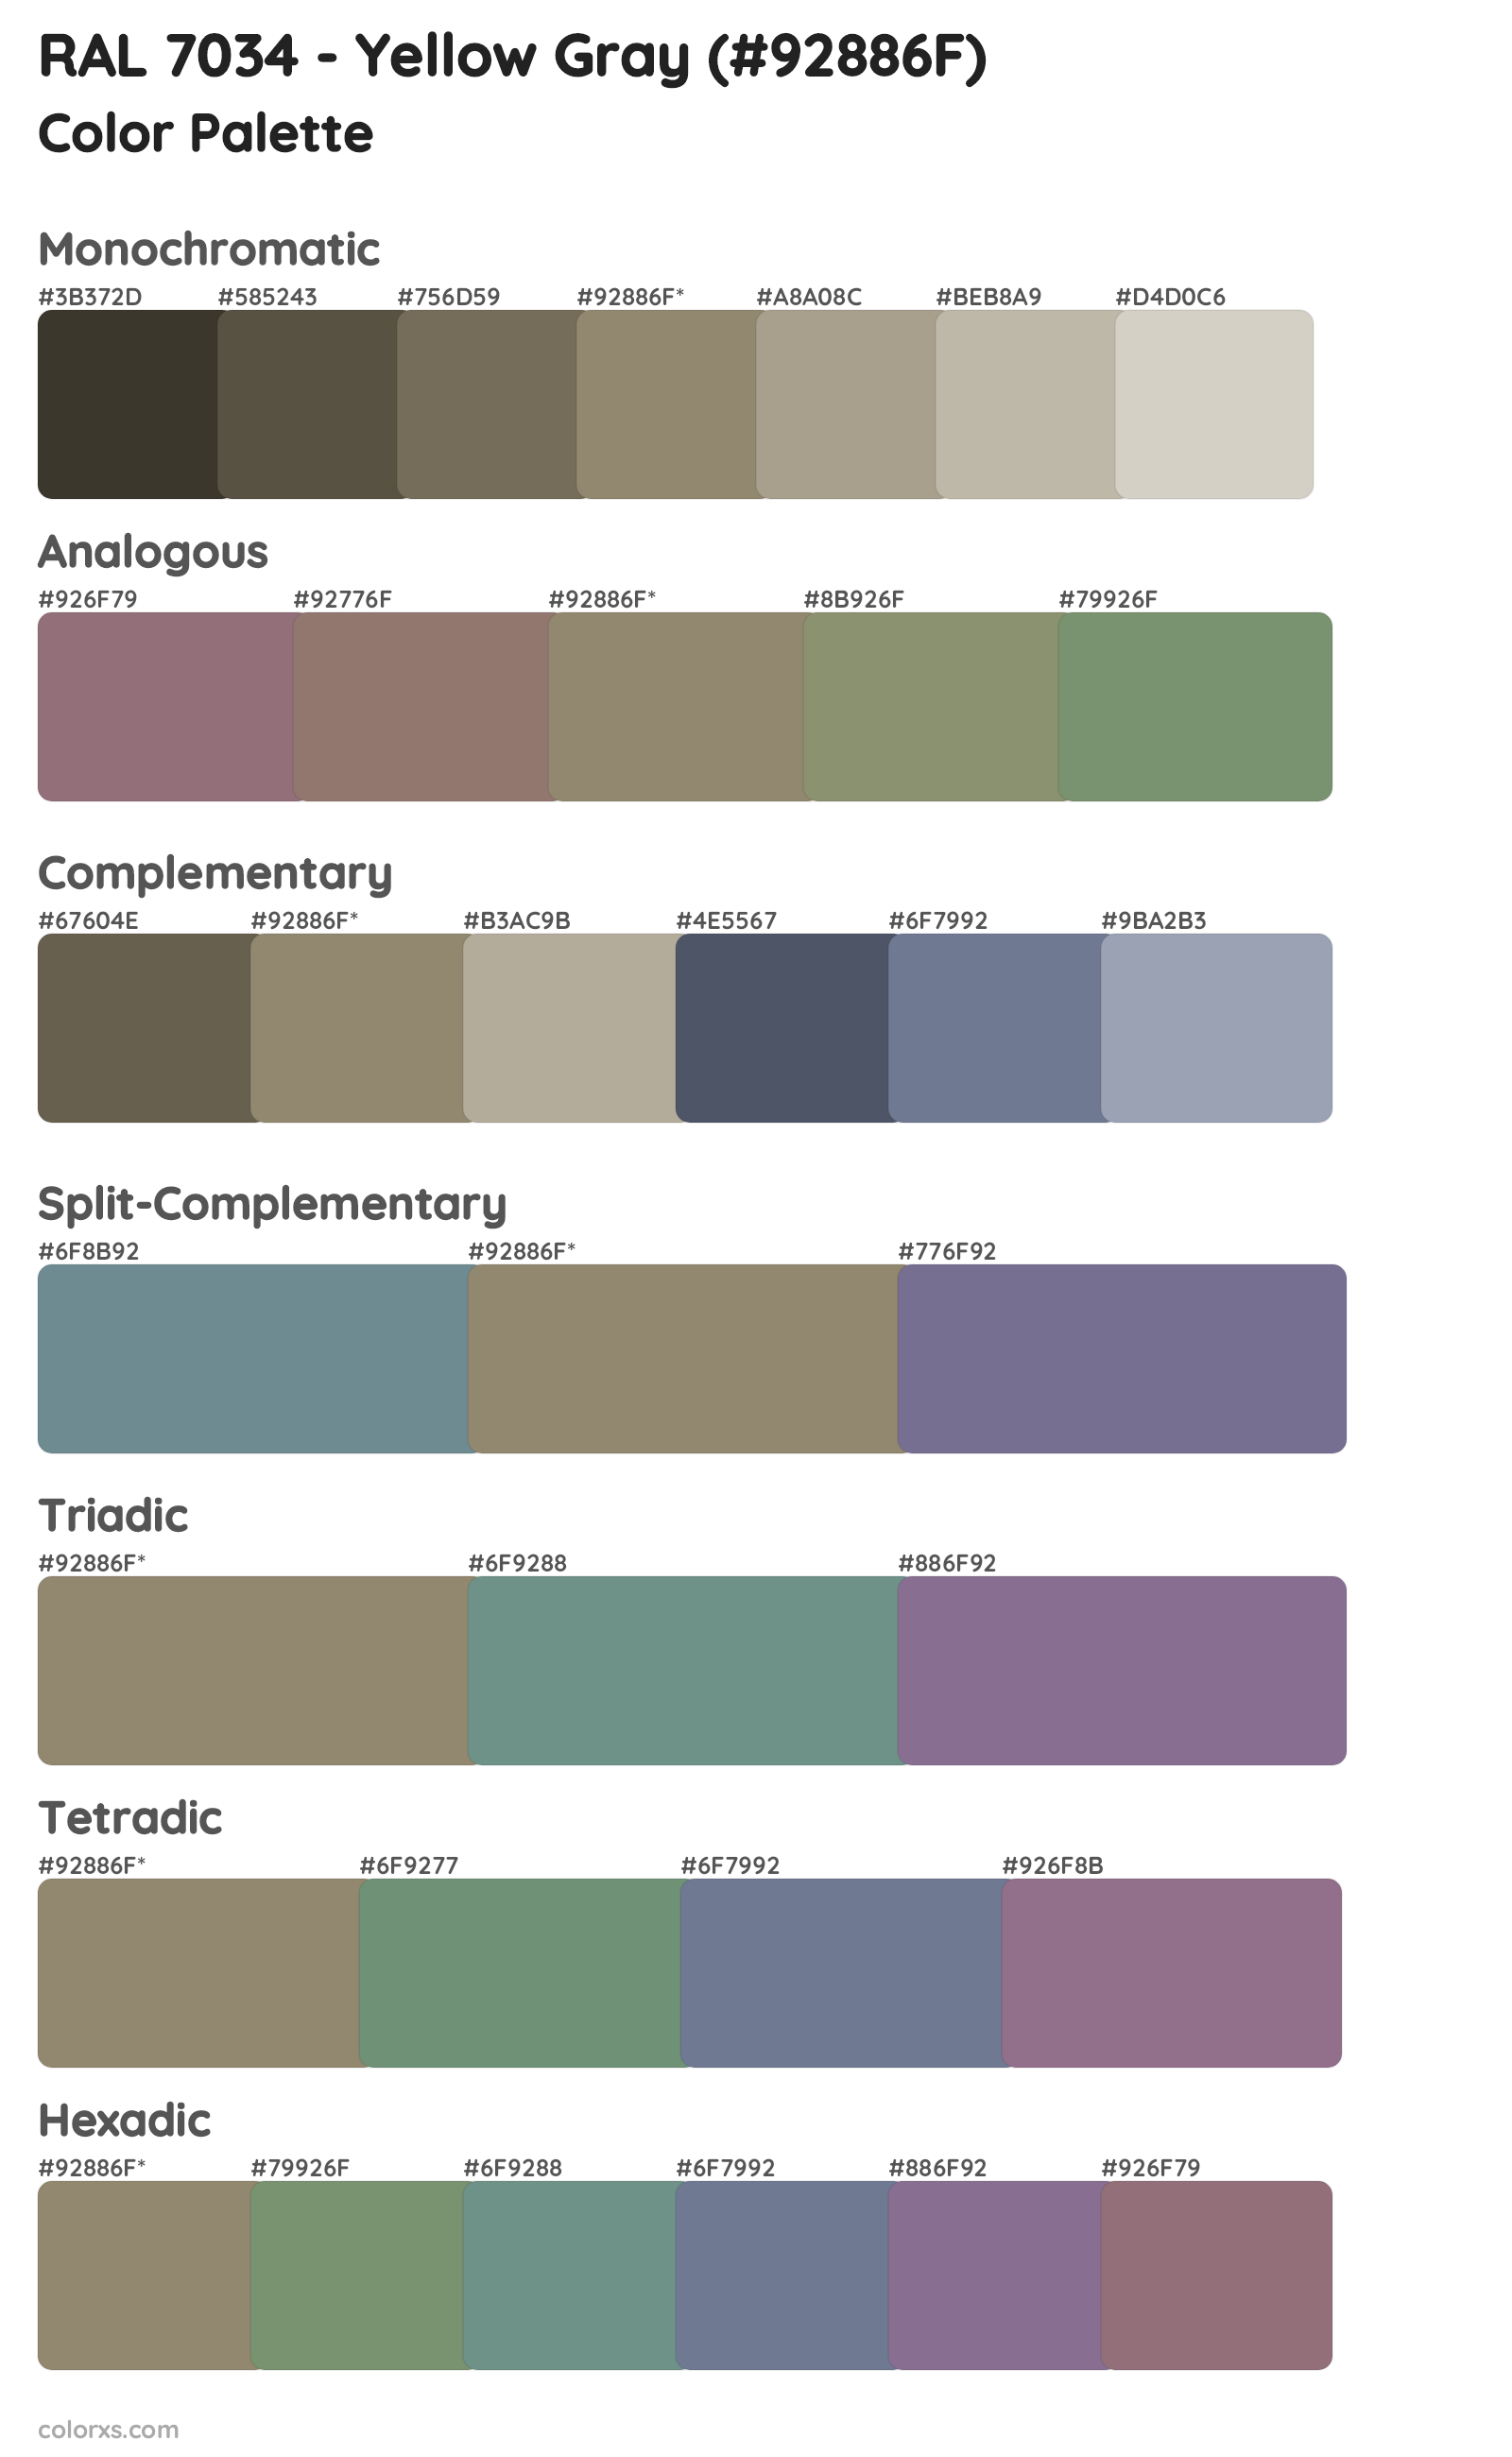 RAL 7034 - Yellow Gray Color Scheme Palettes